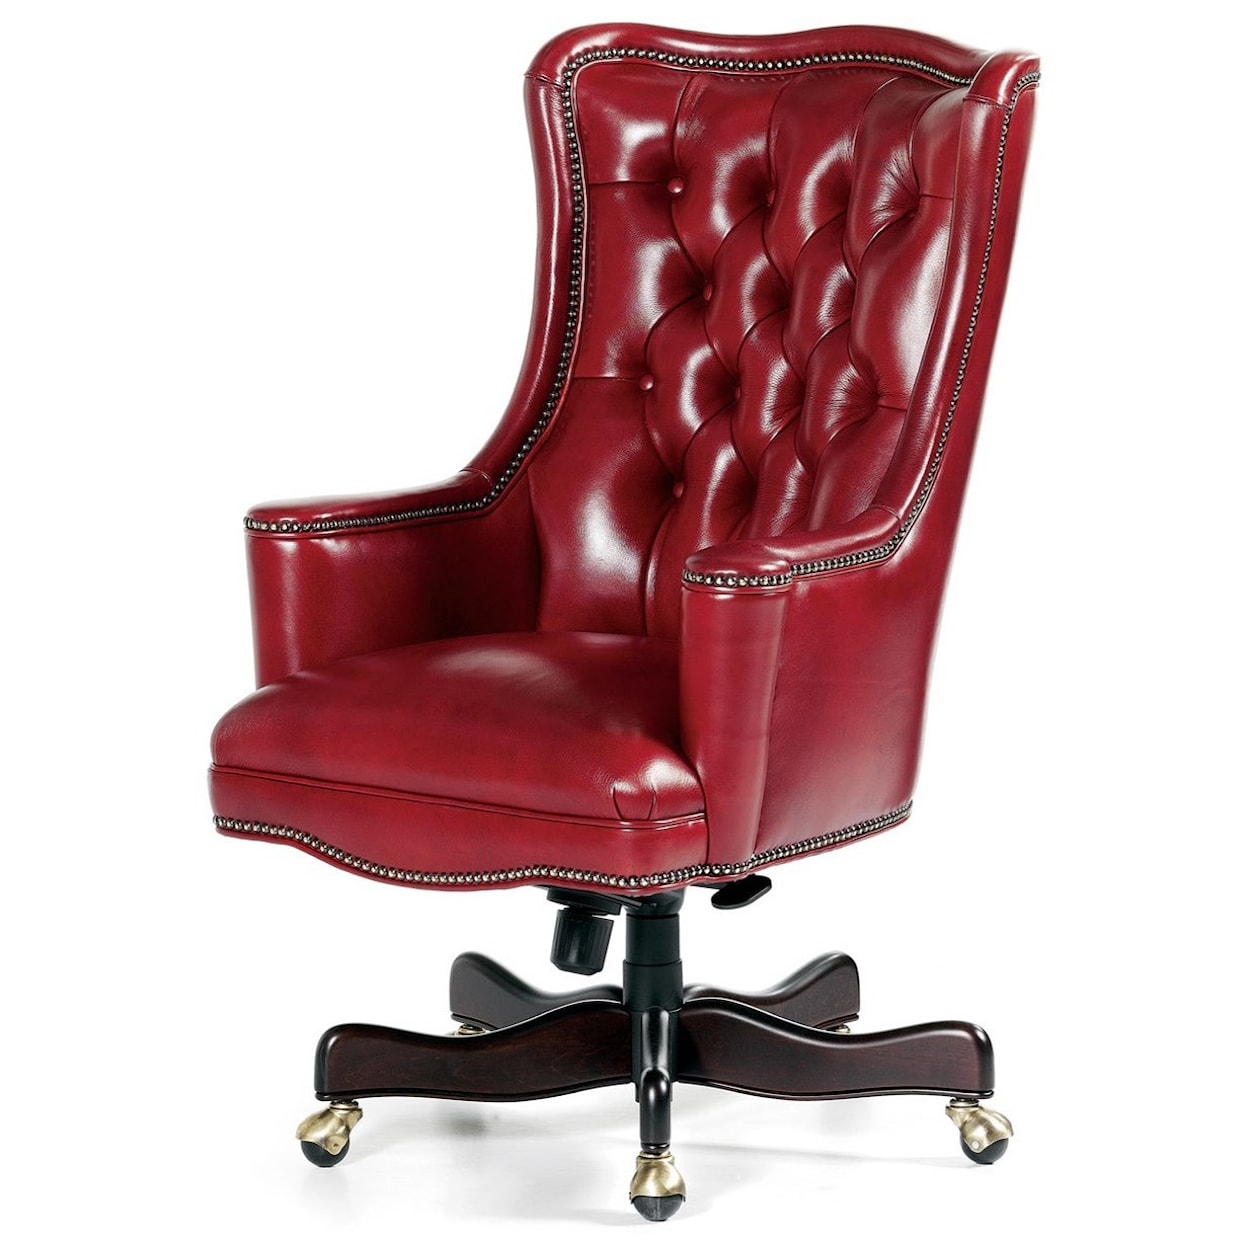 Hancock & Moore Accent Chairs by Hancock and Moore Editors Tufted Swivel Tilt Lift Chair